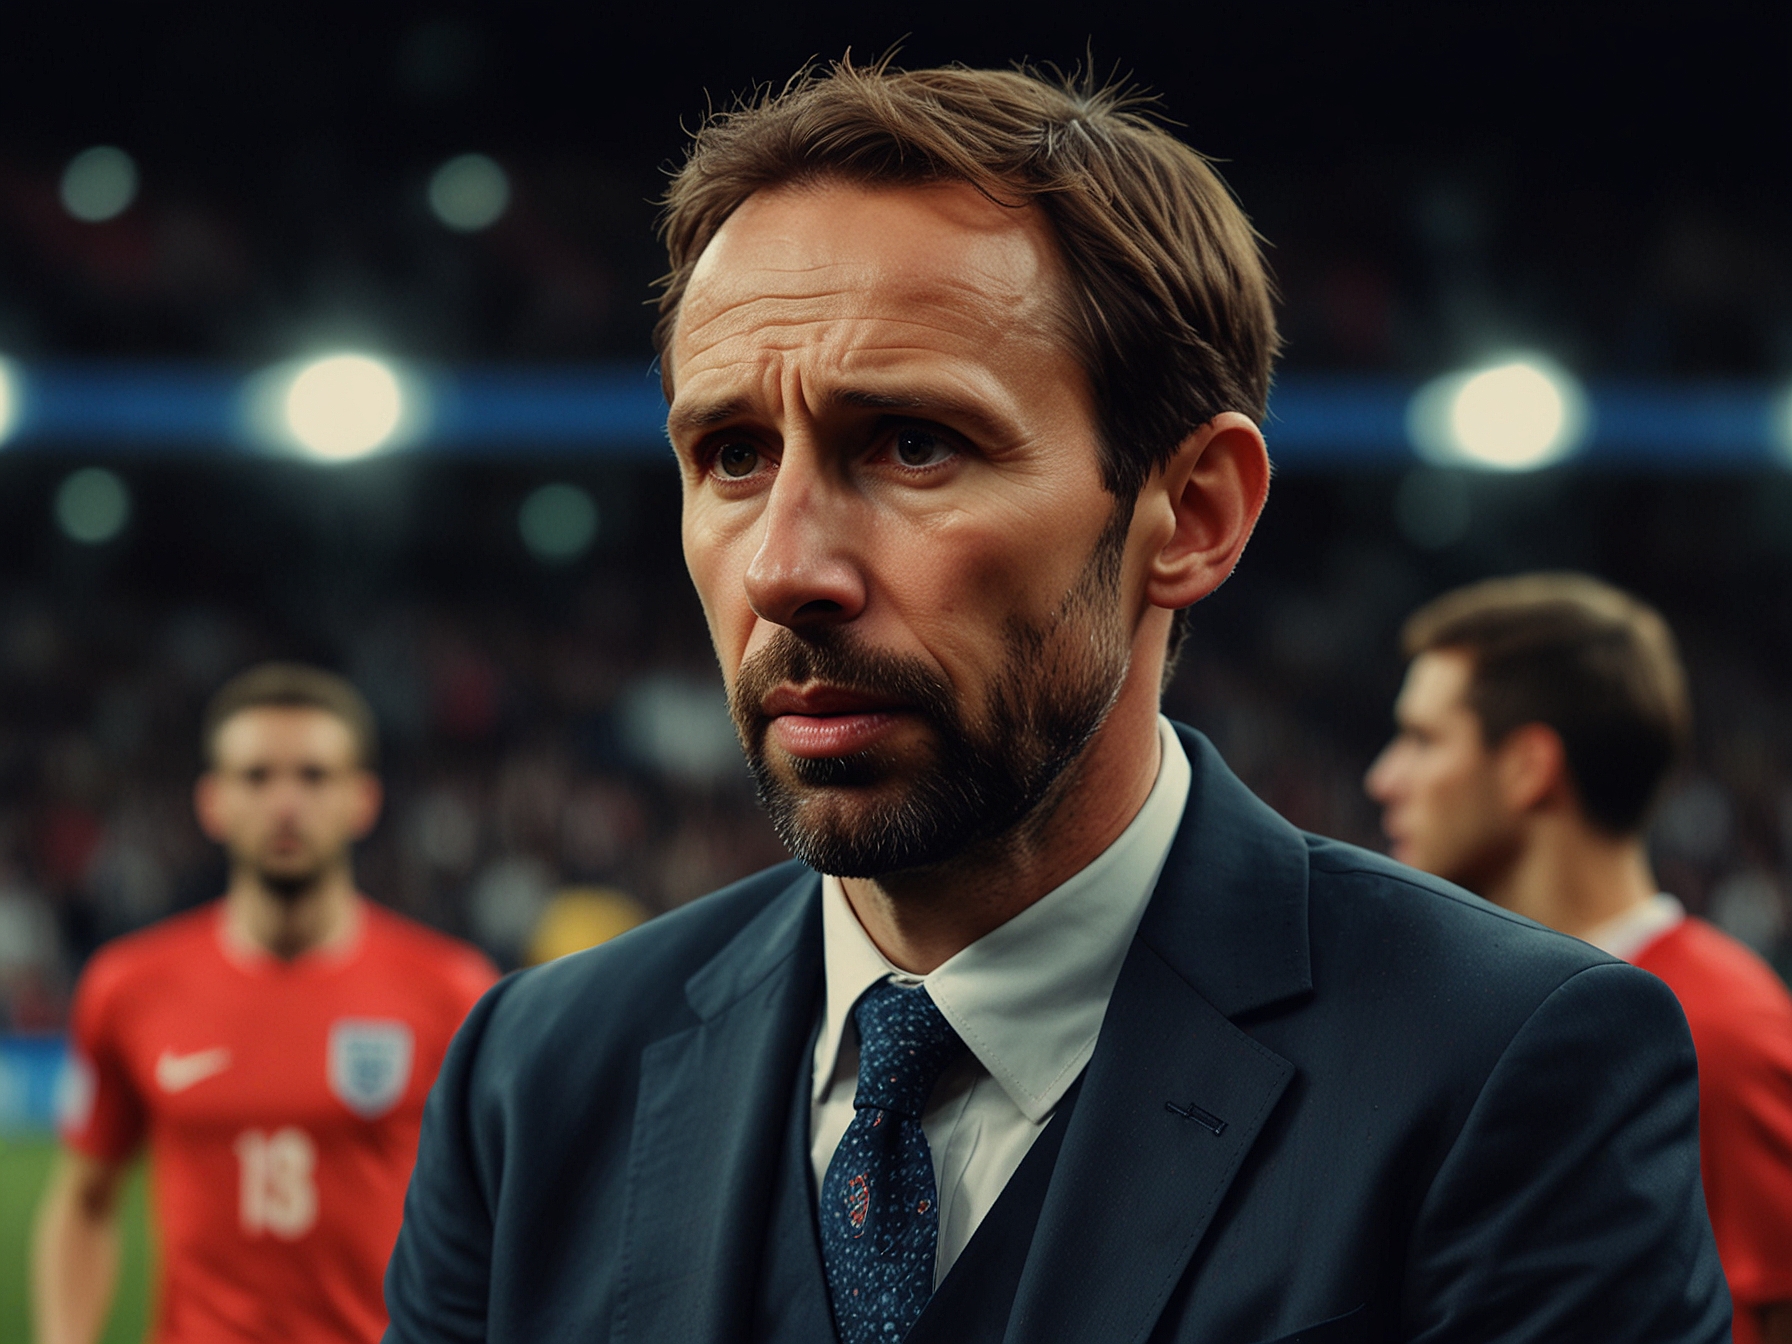 England manager Gareth Southgate looking dejected on the sidelines as fans express their discontent with boos and criticism following the underwhelming draw against Slovenia.